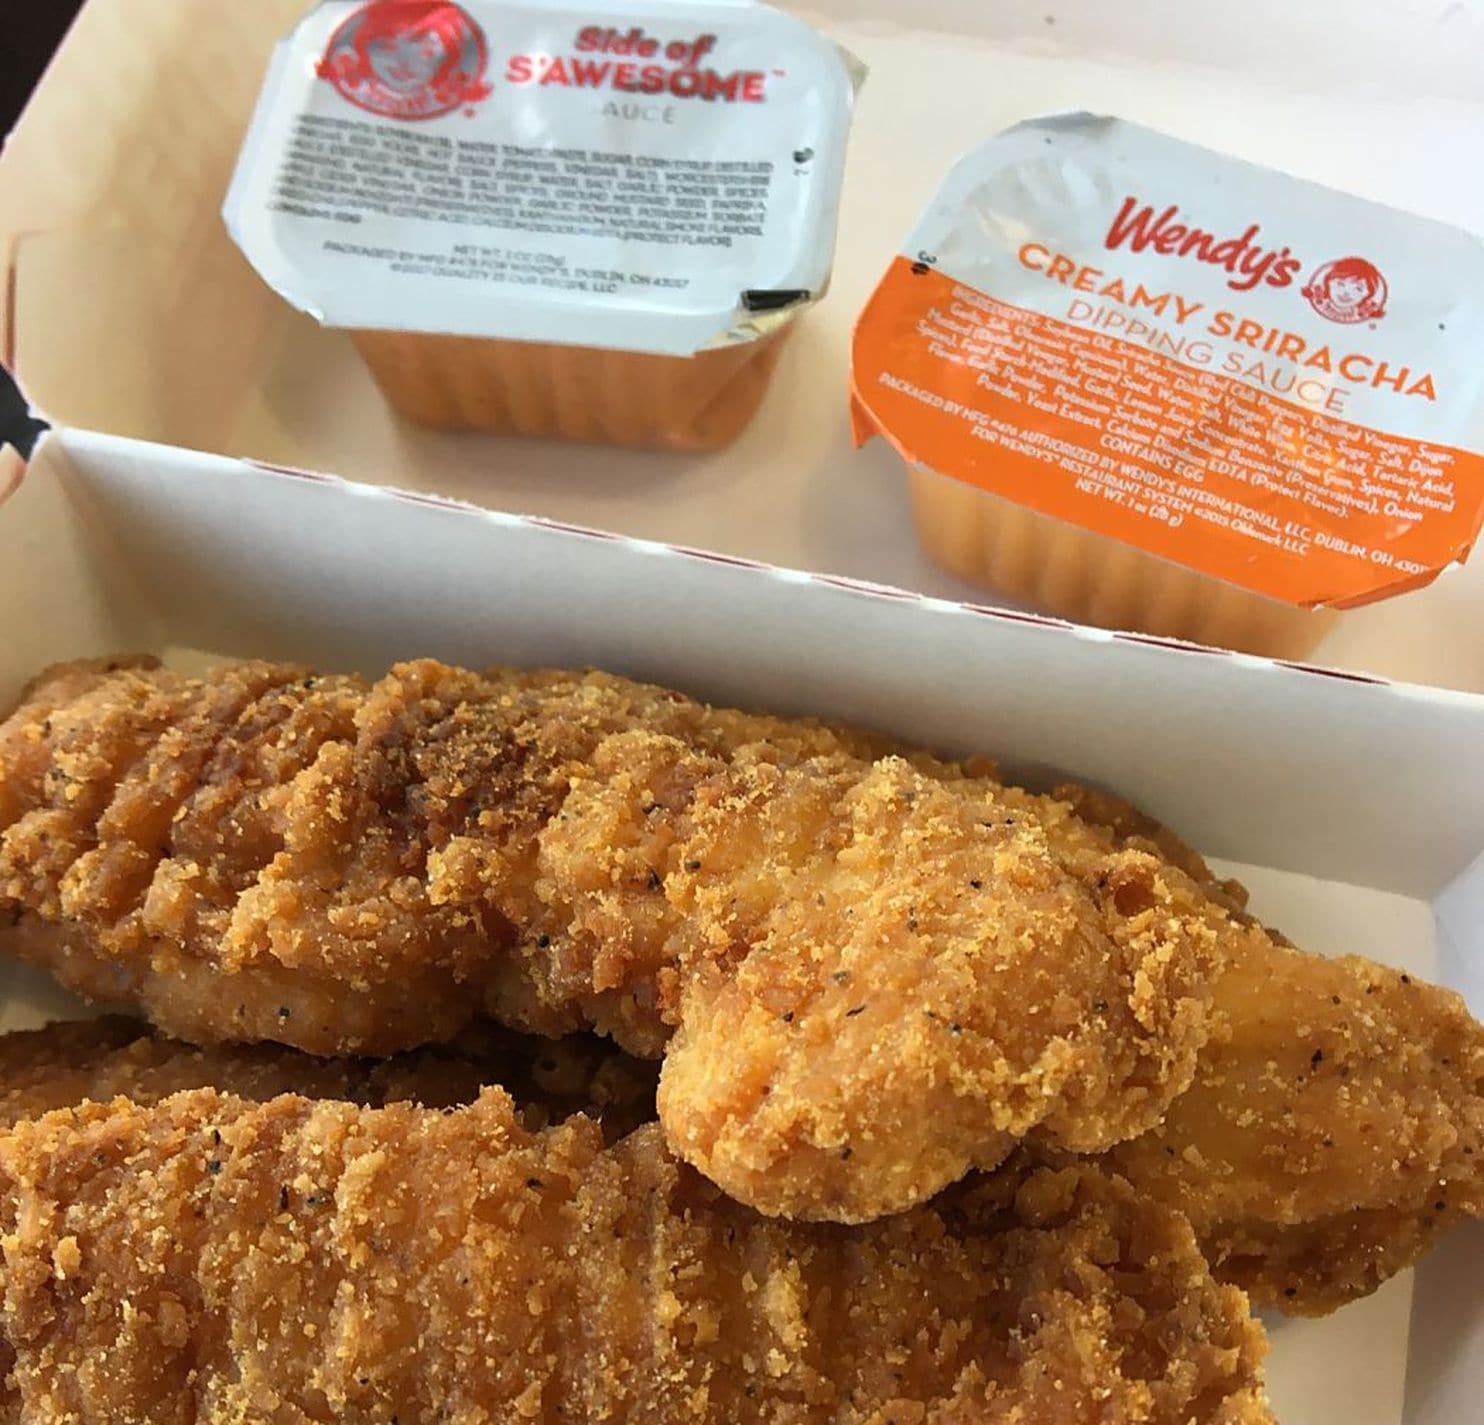 Wendys Chicken Tenders
 McDonald’s axed its best new menu item for the holidays